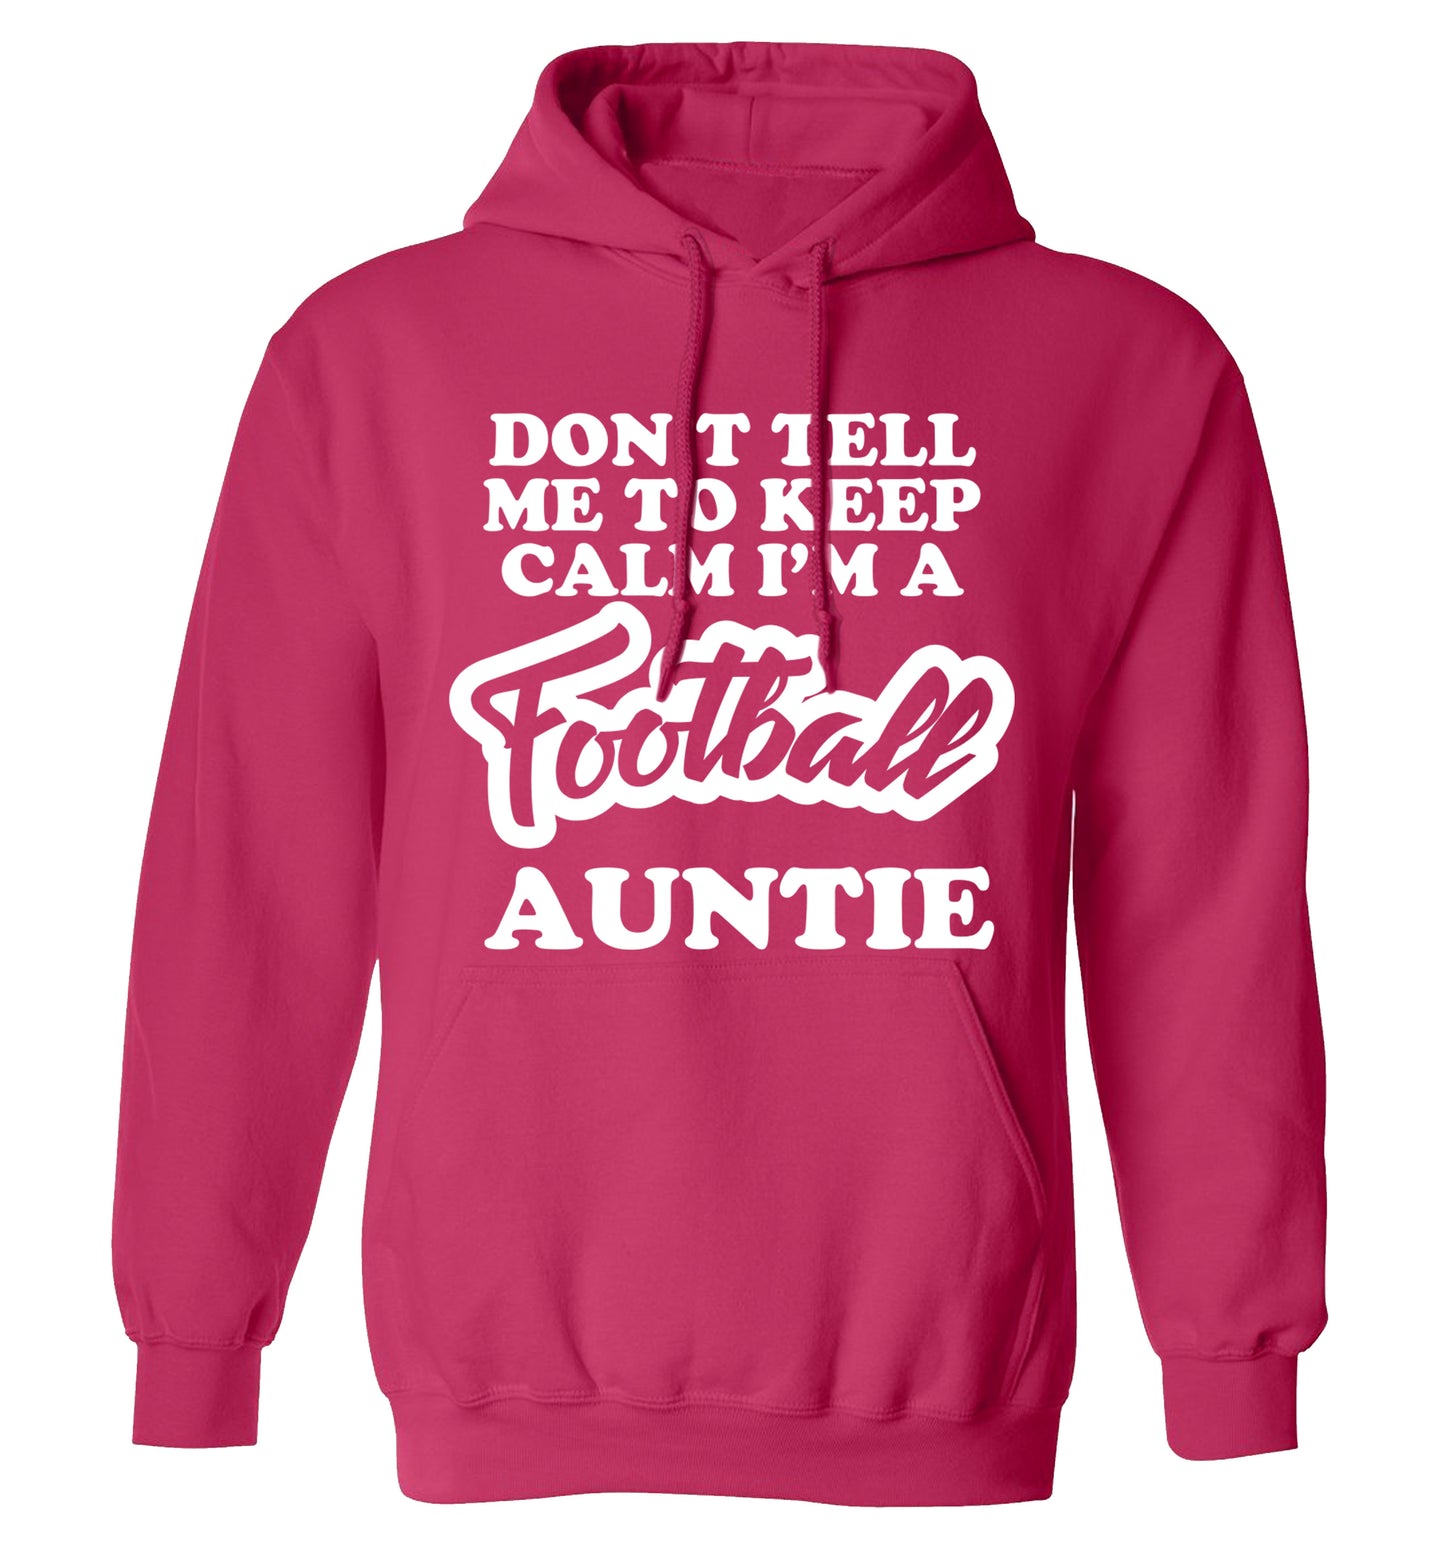 Don't tell me to keep calm I'm a football auntie adults unisexpink hoodie 2XL